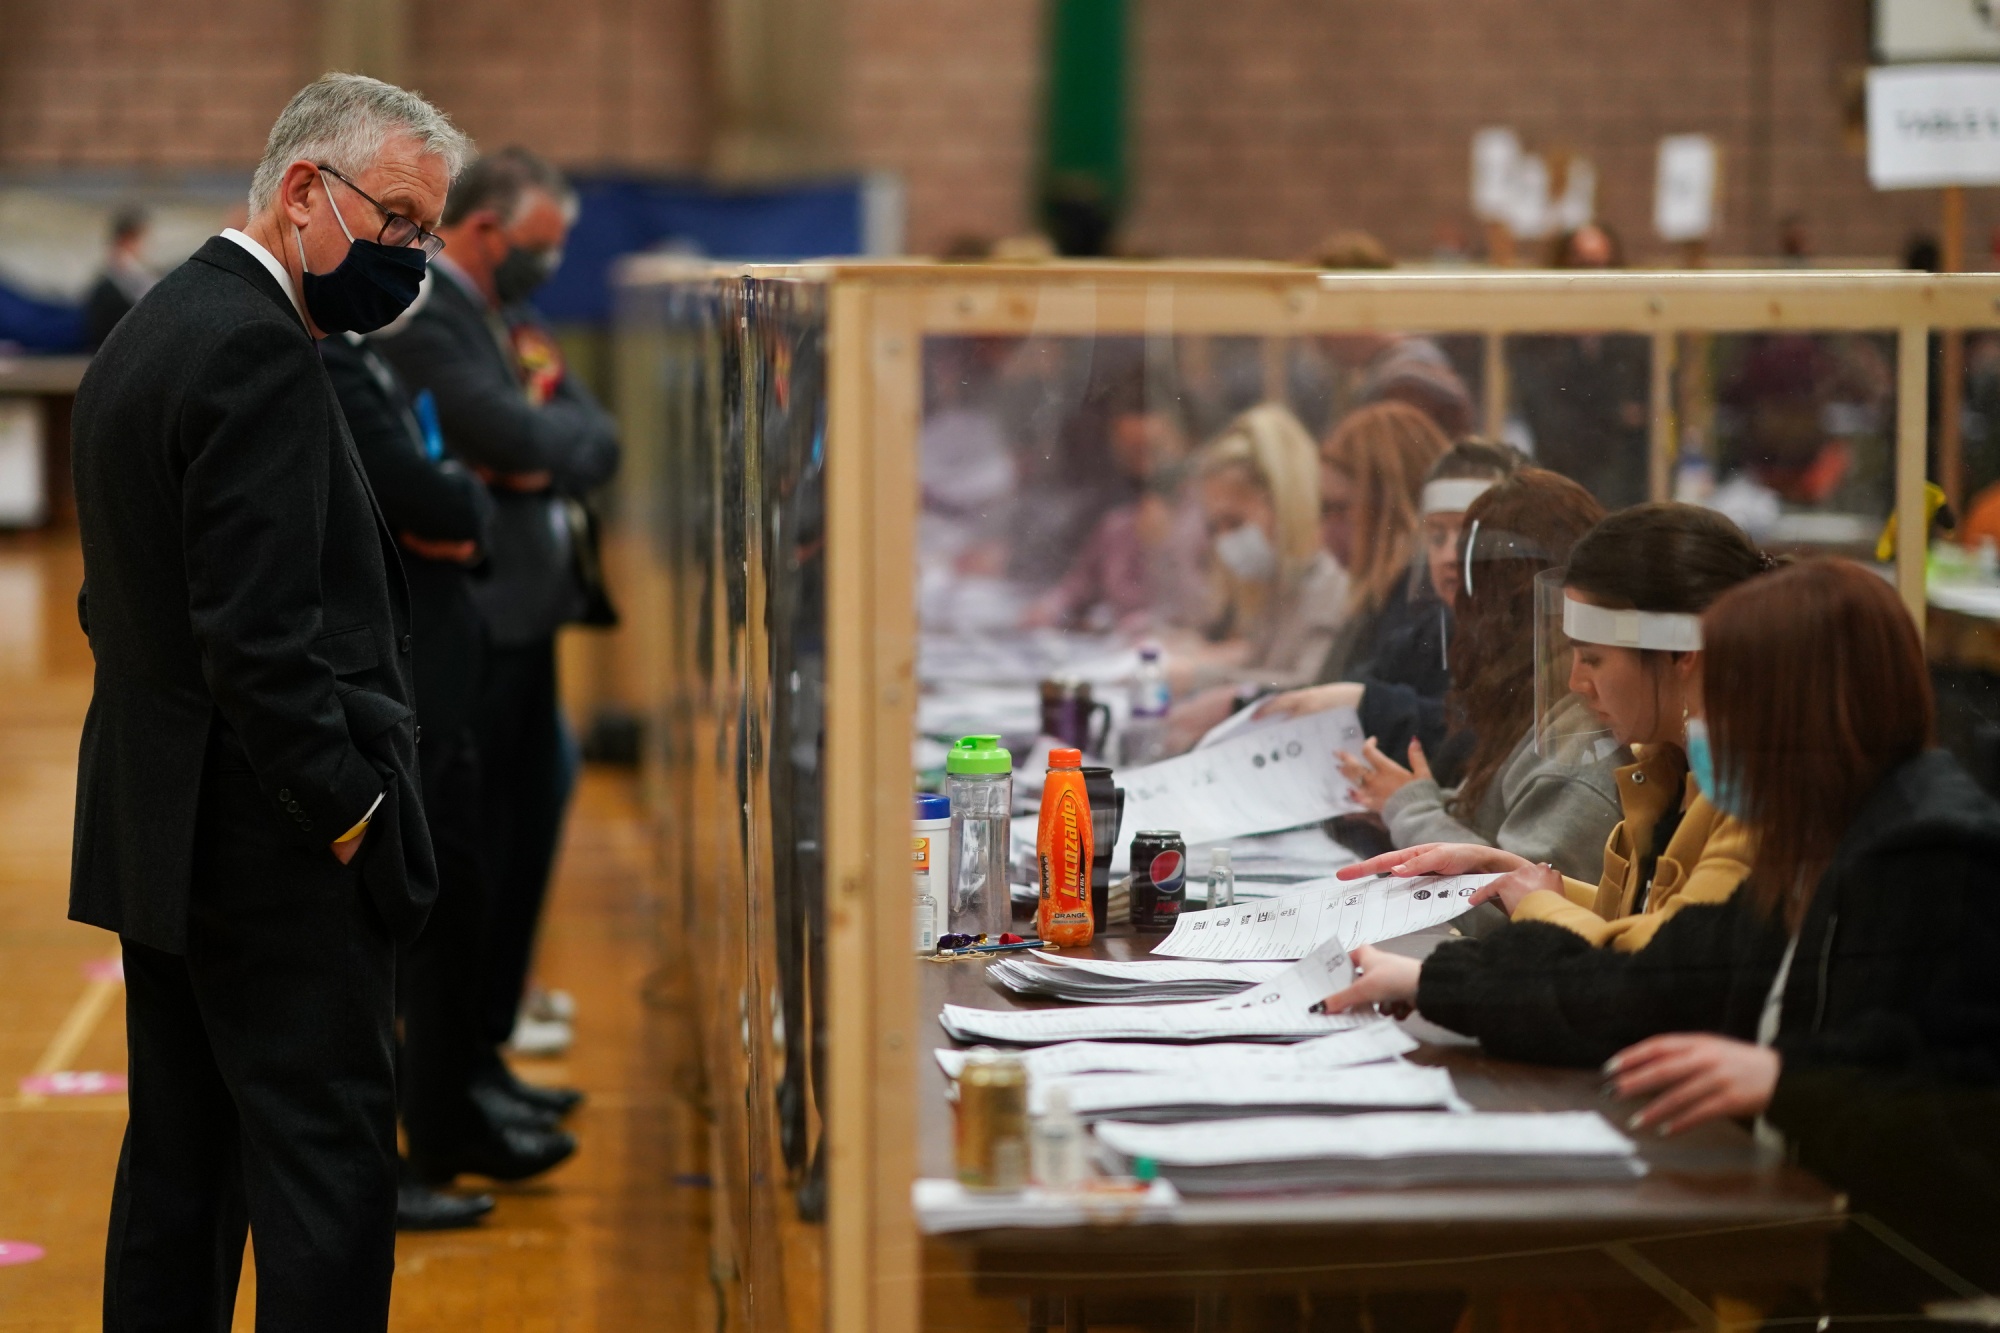 People observe as the count takes place for the Hartlepool Parliamentary By-election on May 7.